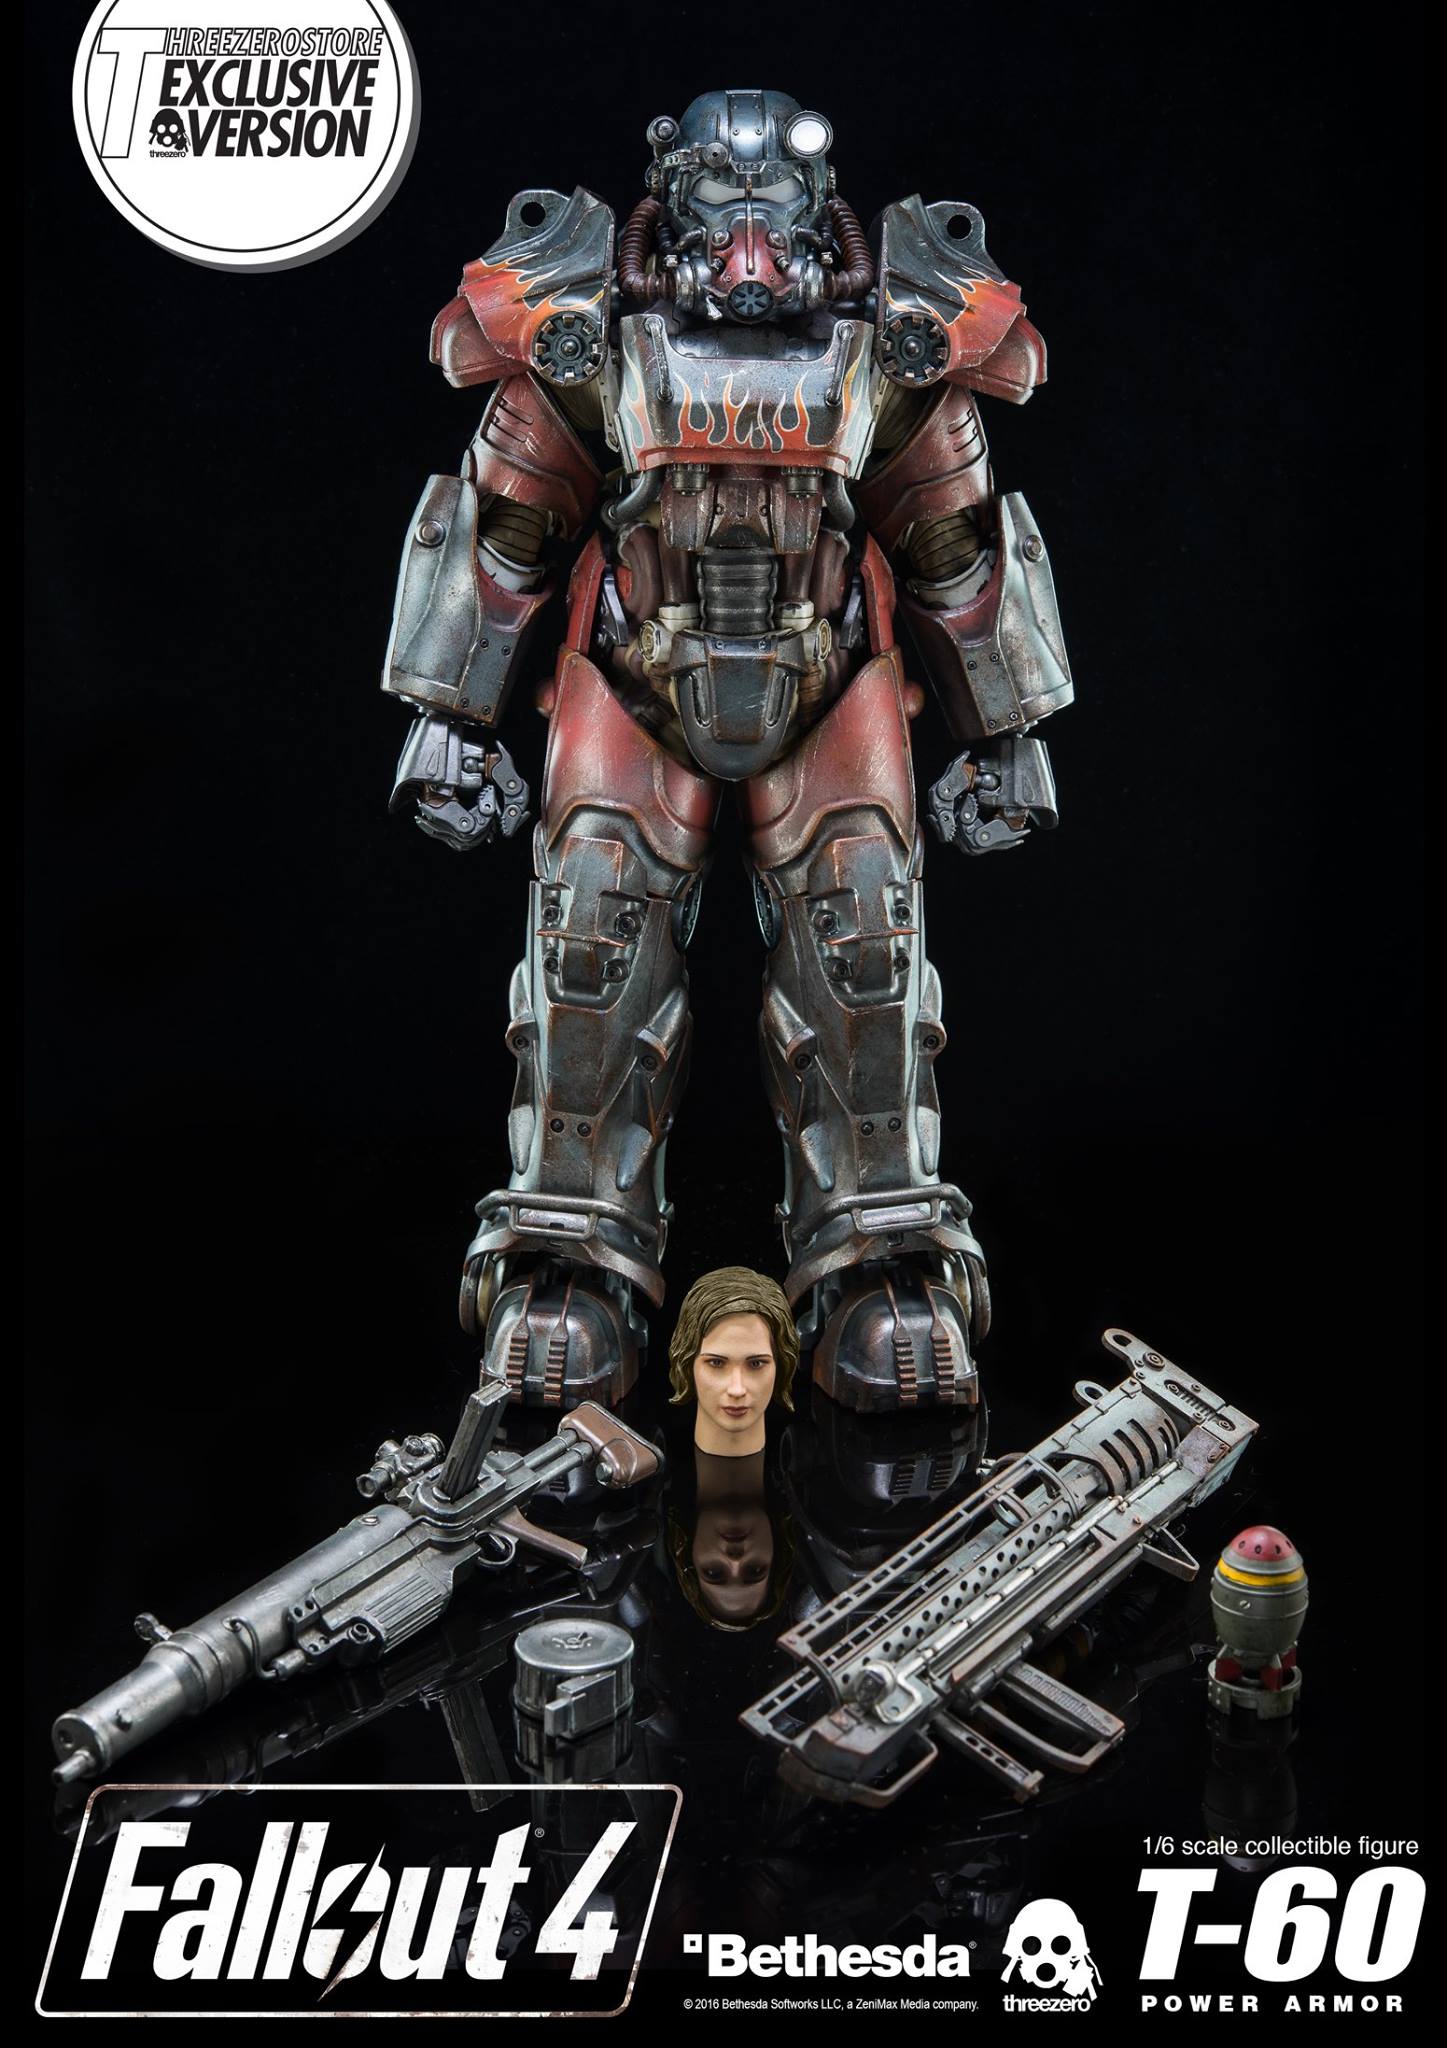 Look At This $398 Fallout 4 Figure